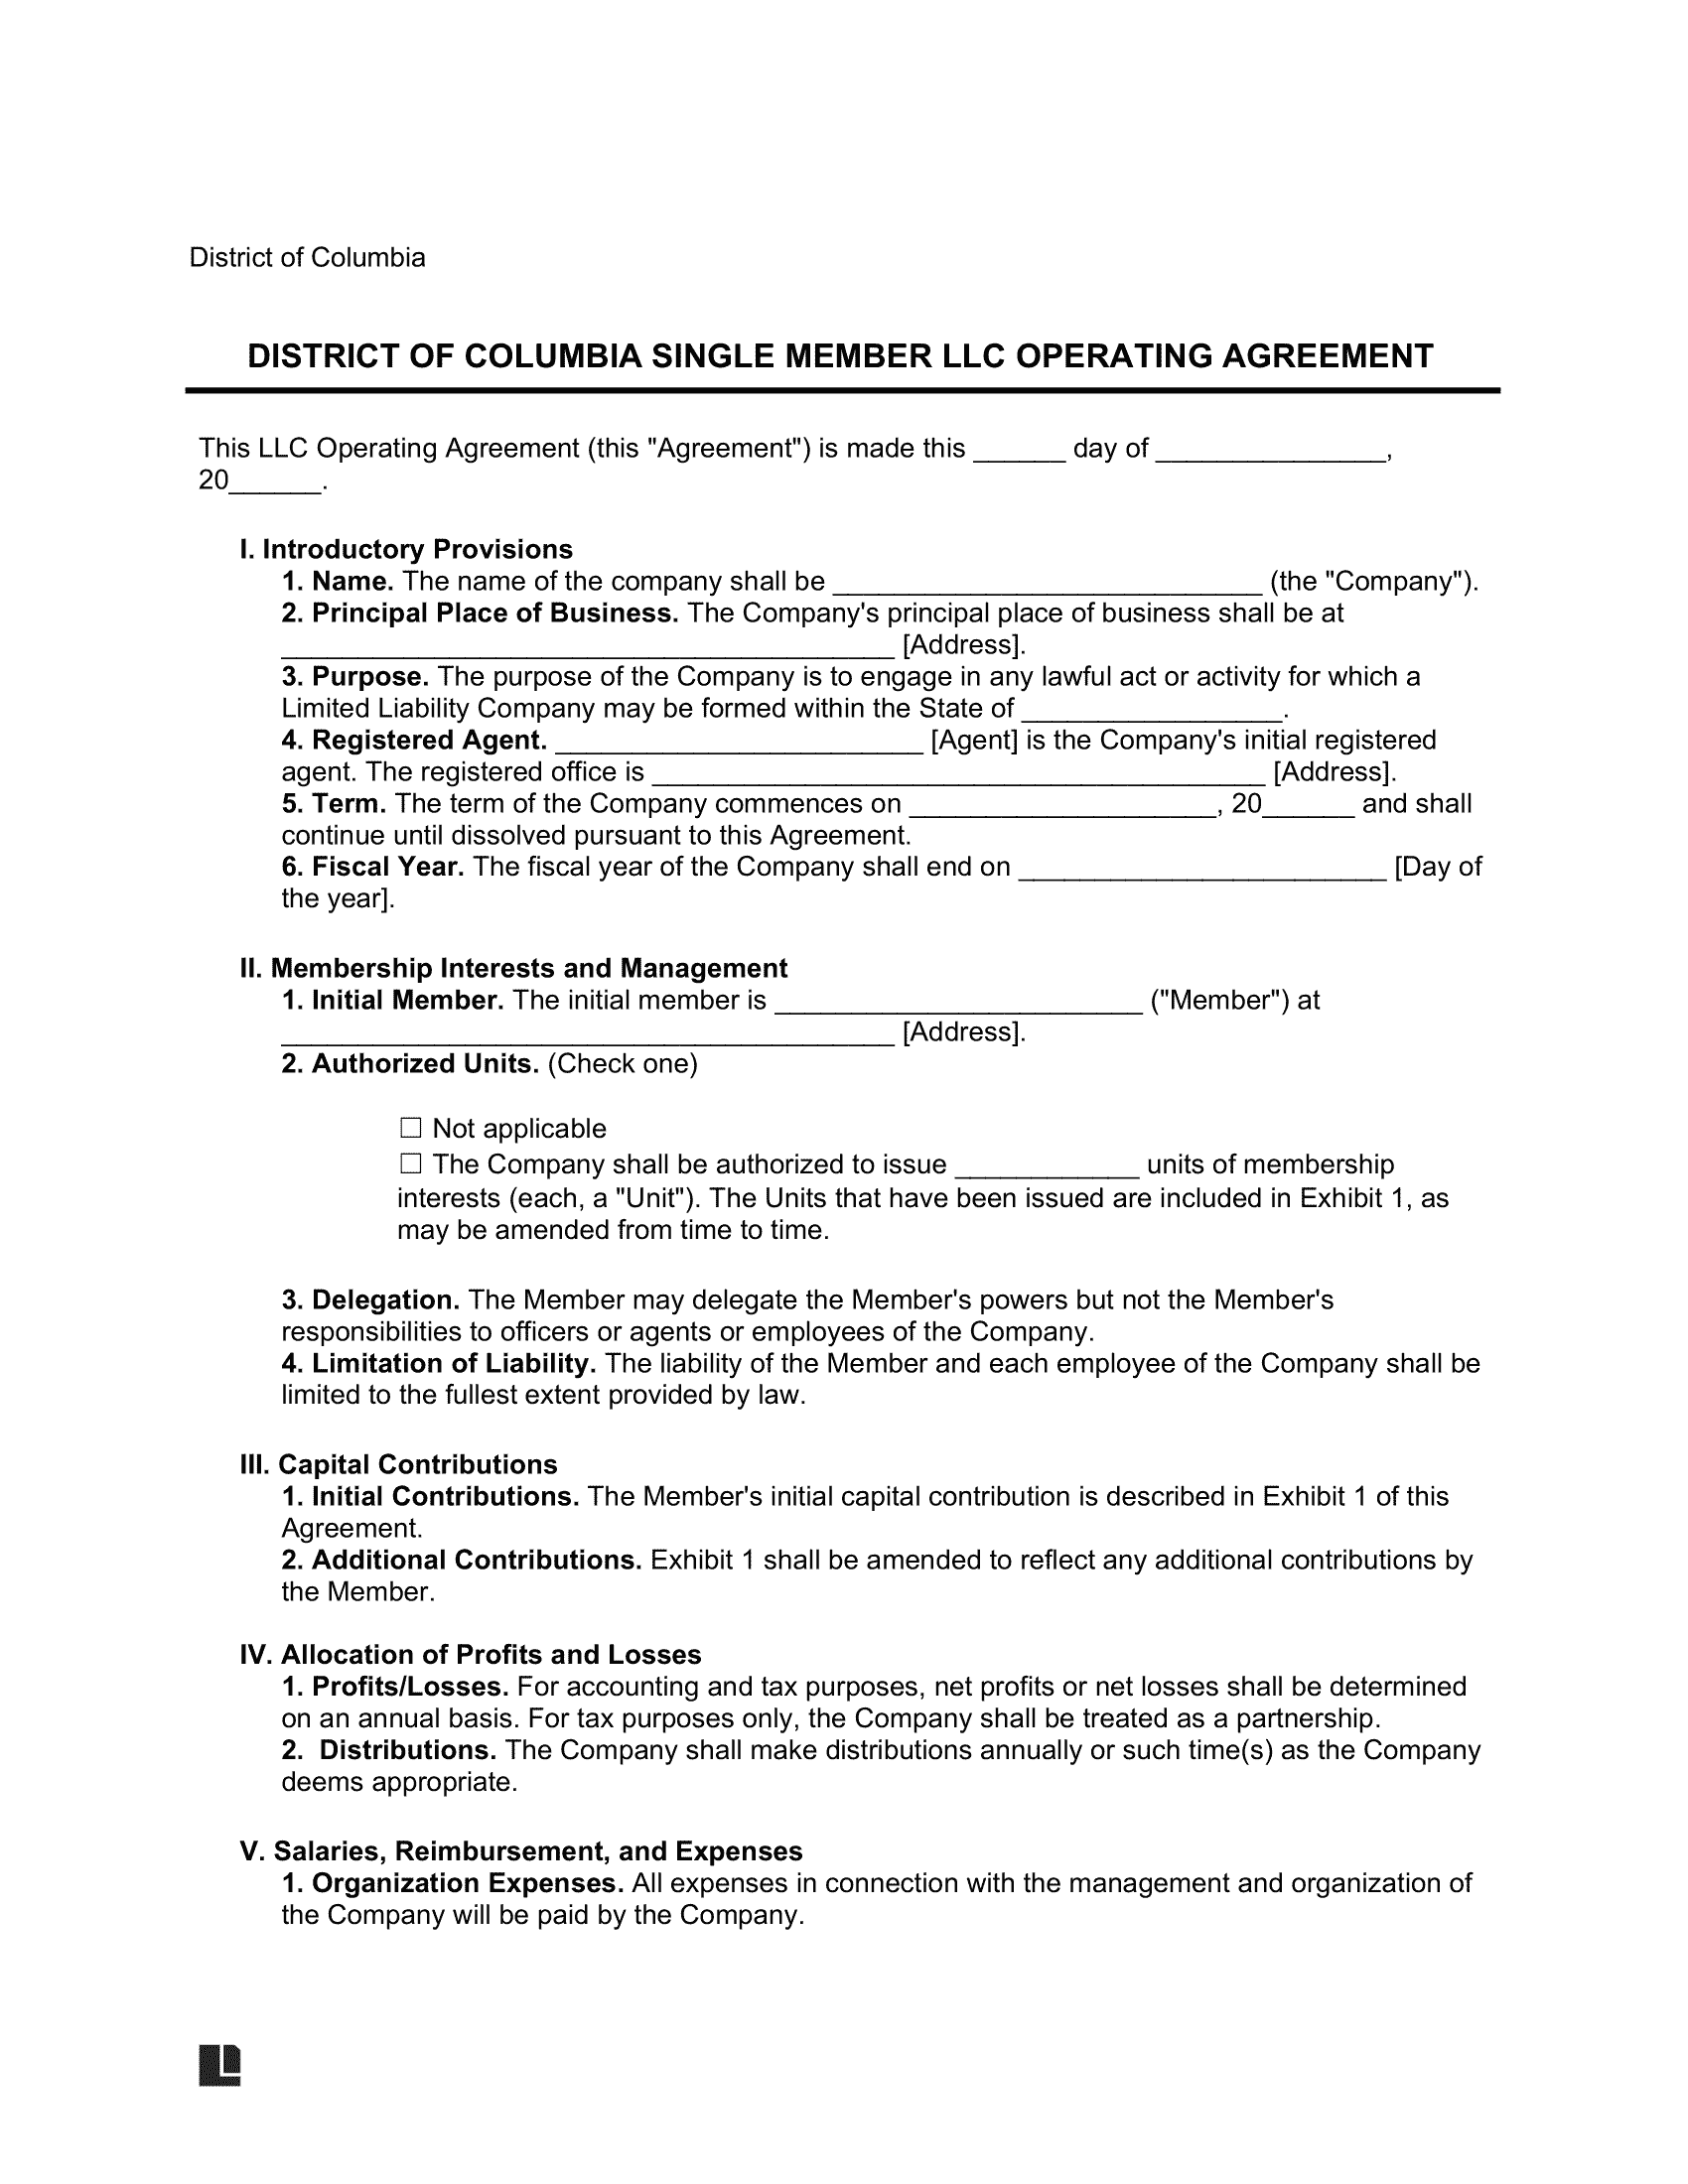 District of Columbia Single Member LLC Operating Agreement Form